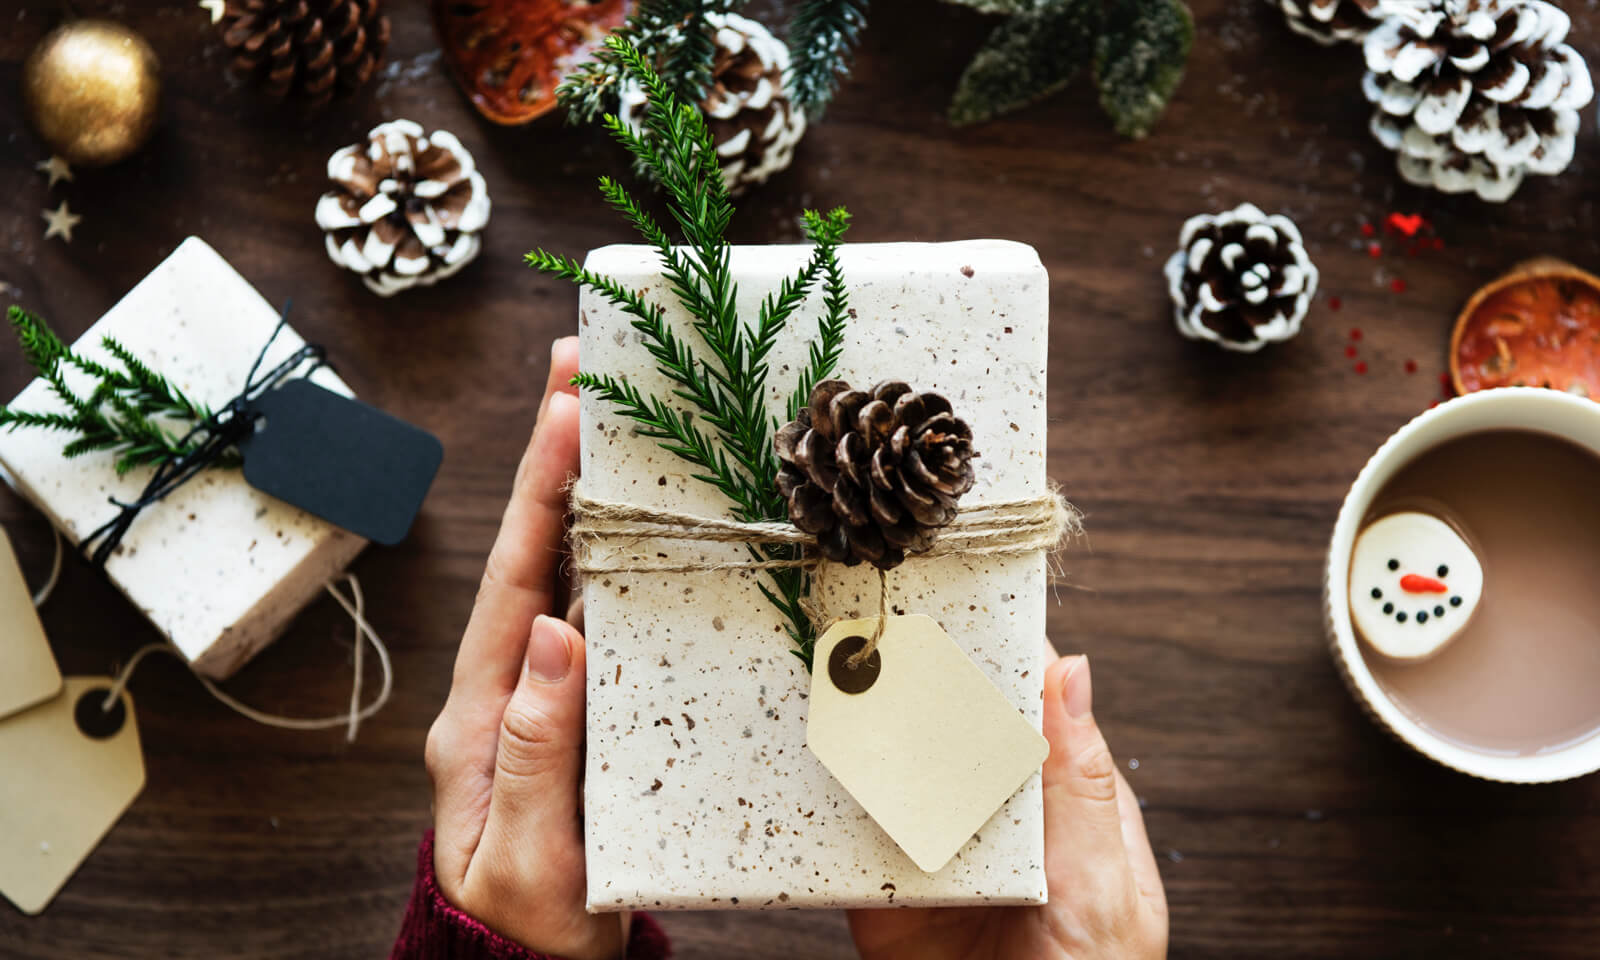 5 Reasons to Set Up Your Online Store Now to Prepare for the Holidays